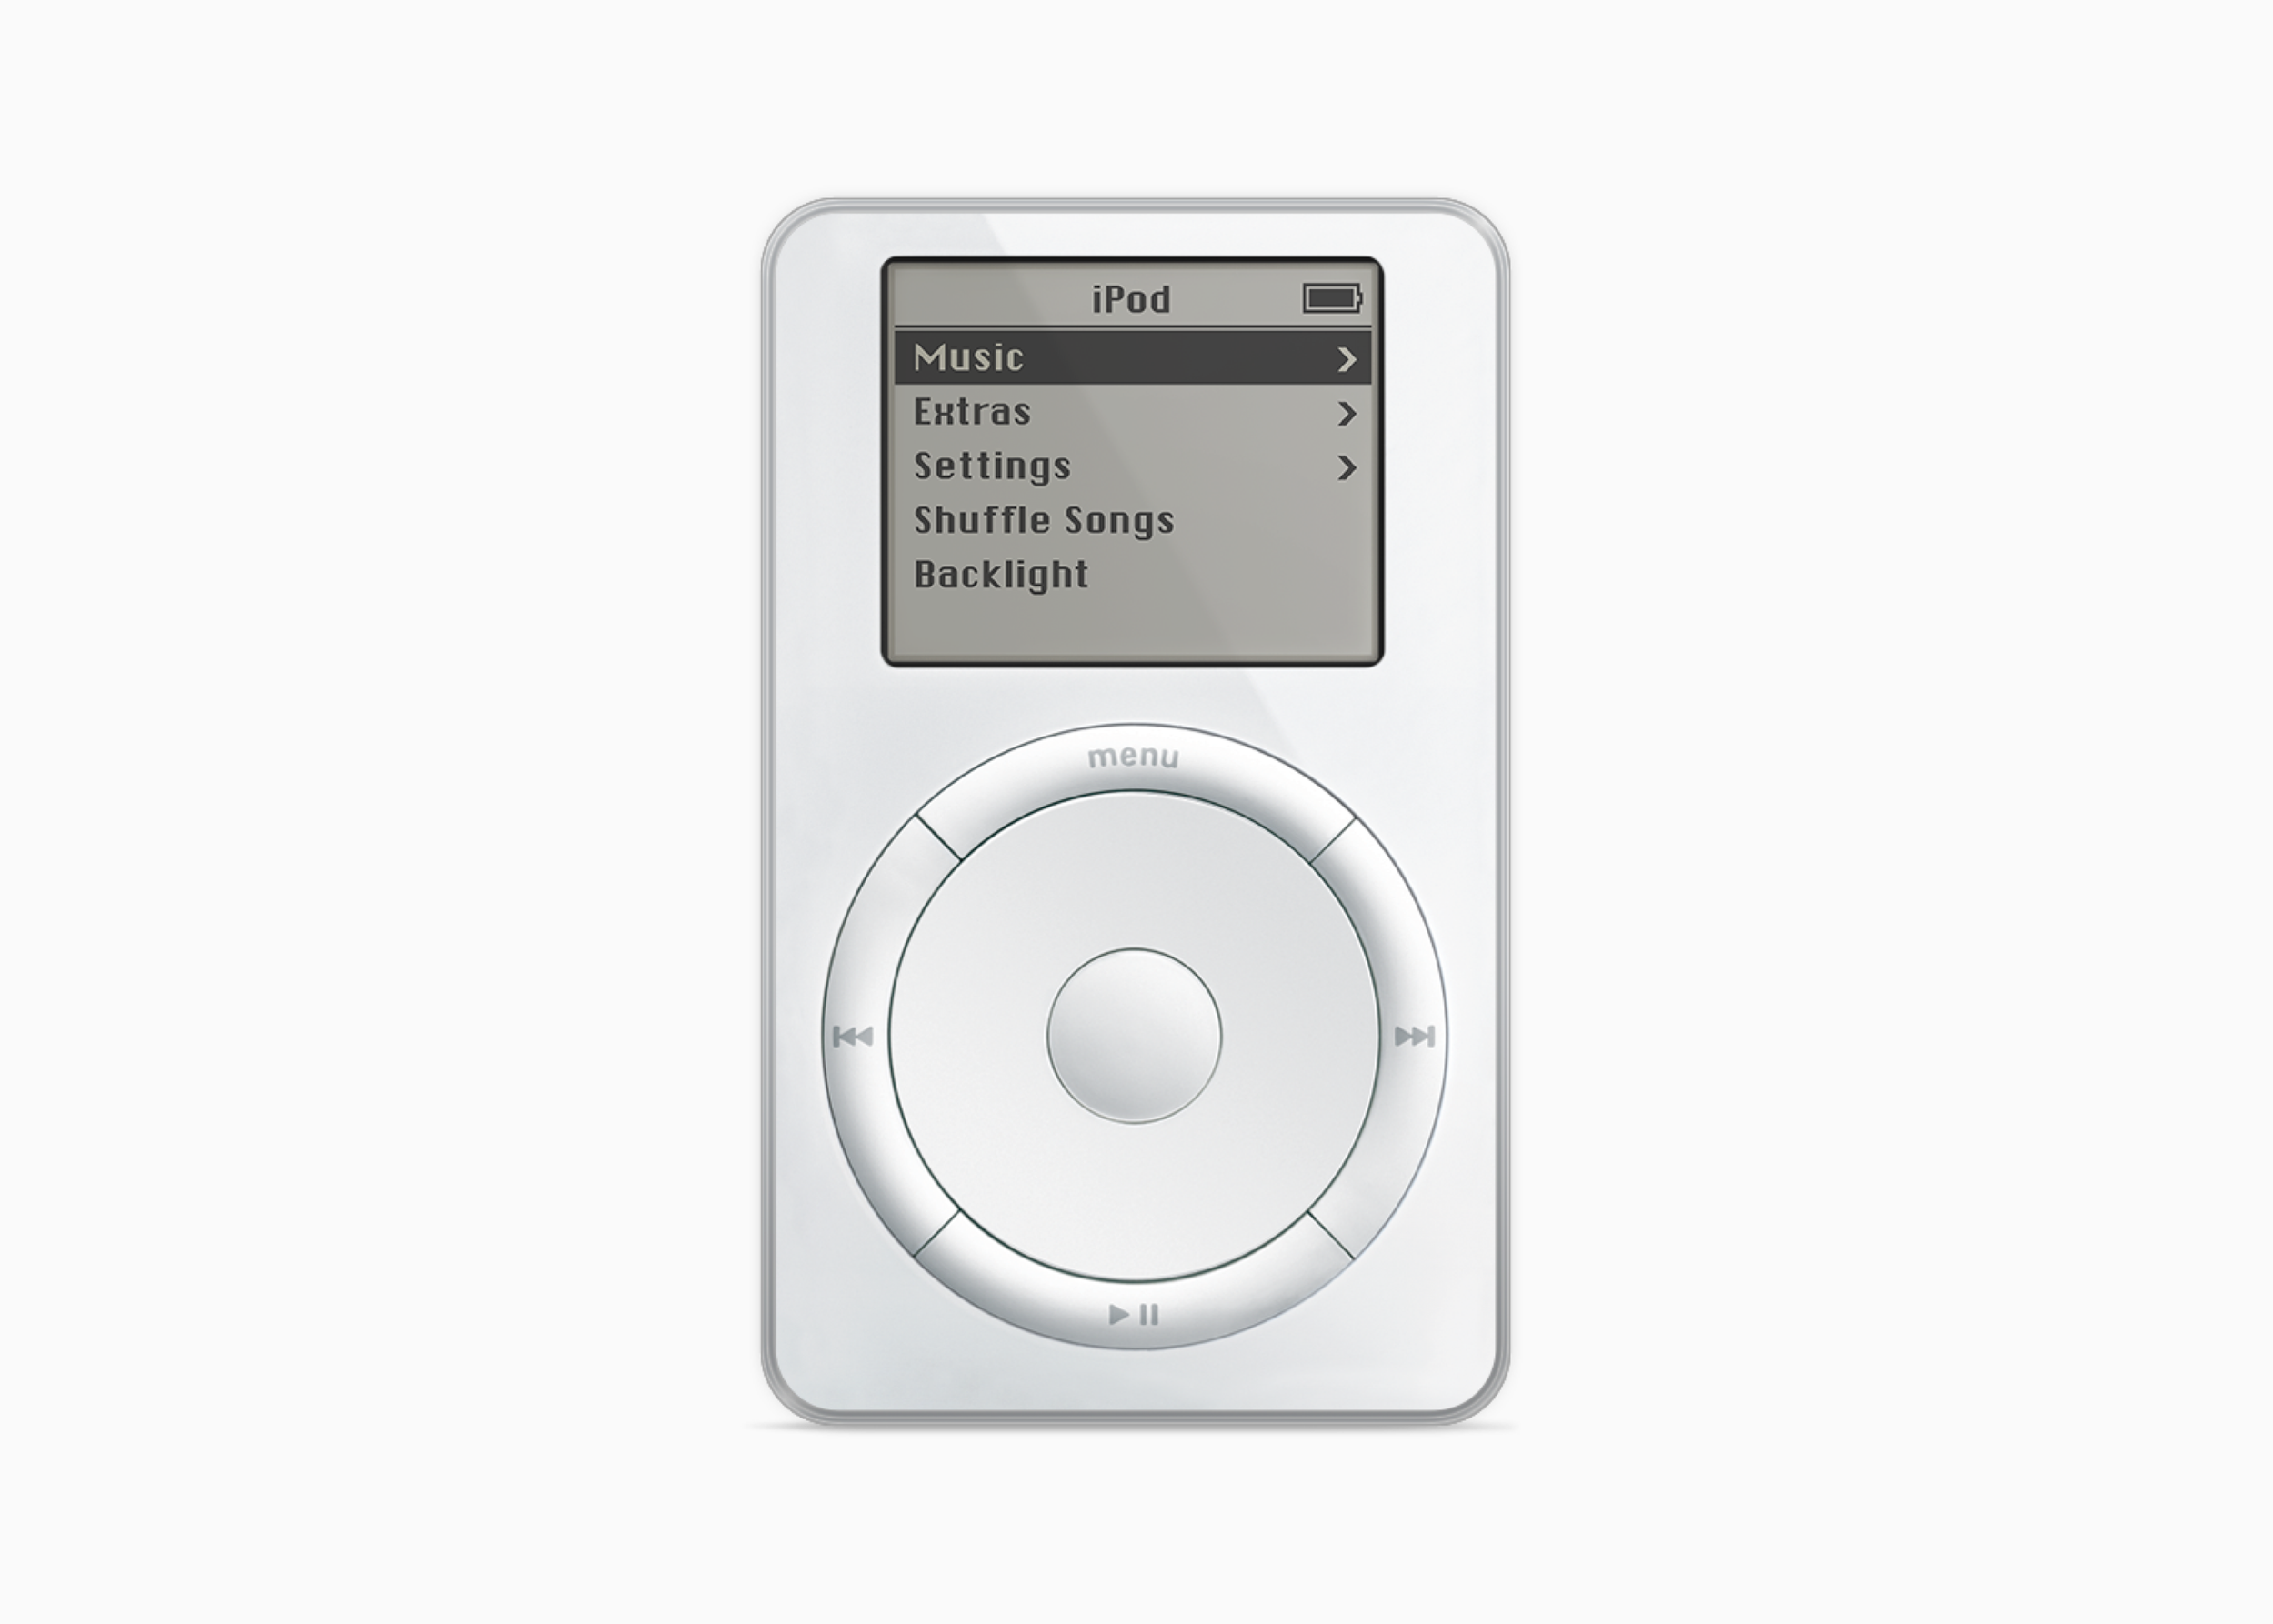 Apple-iPod-end-of-life-iPod-first-generation.png